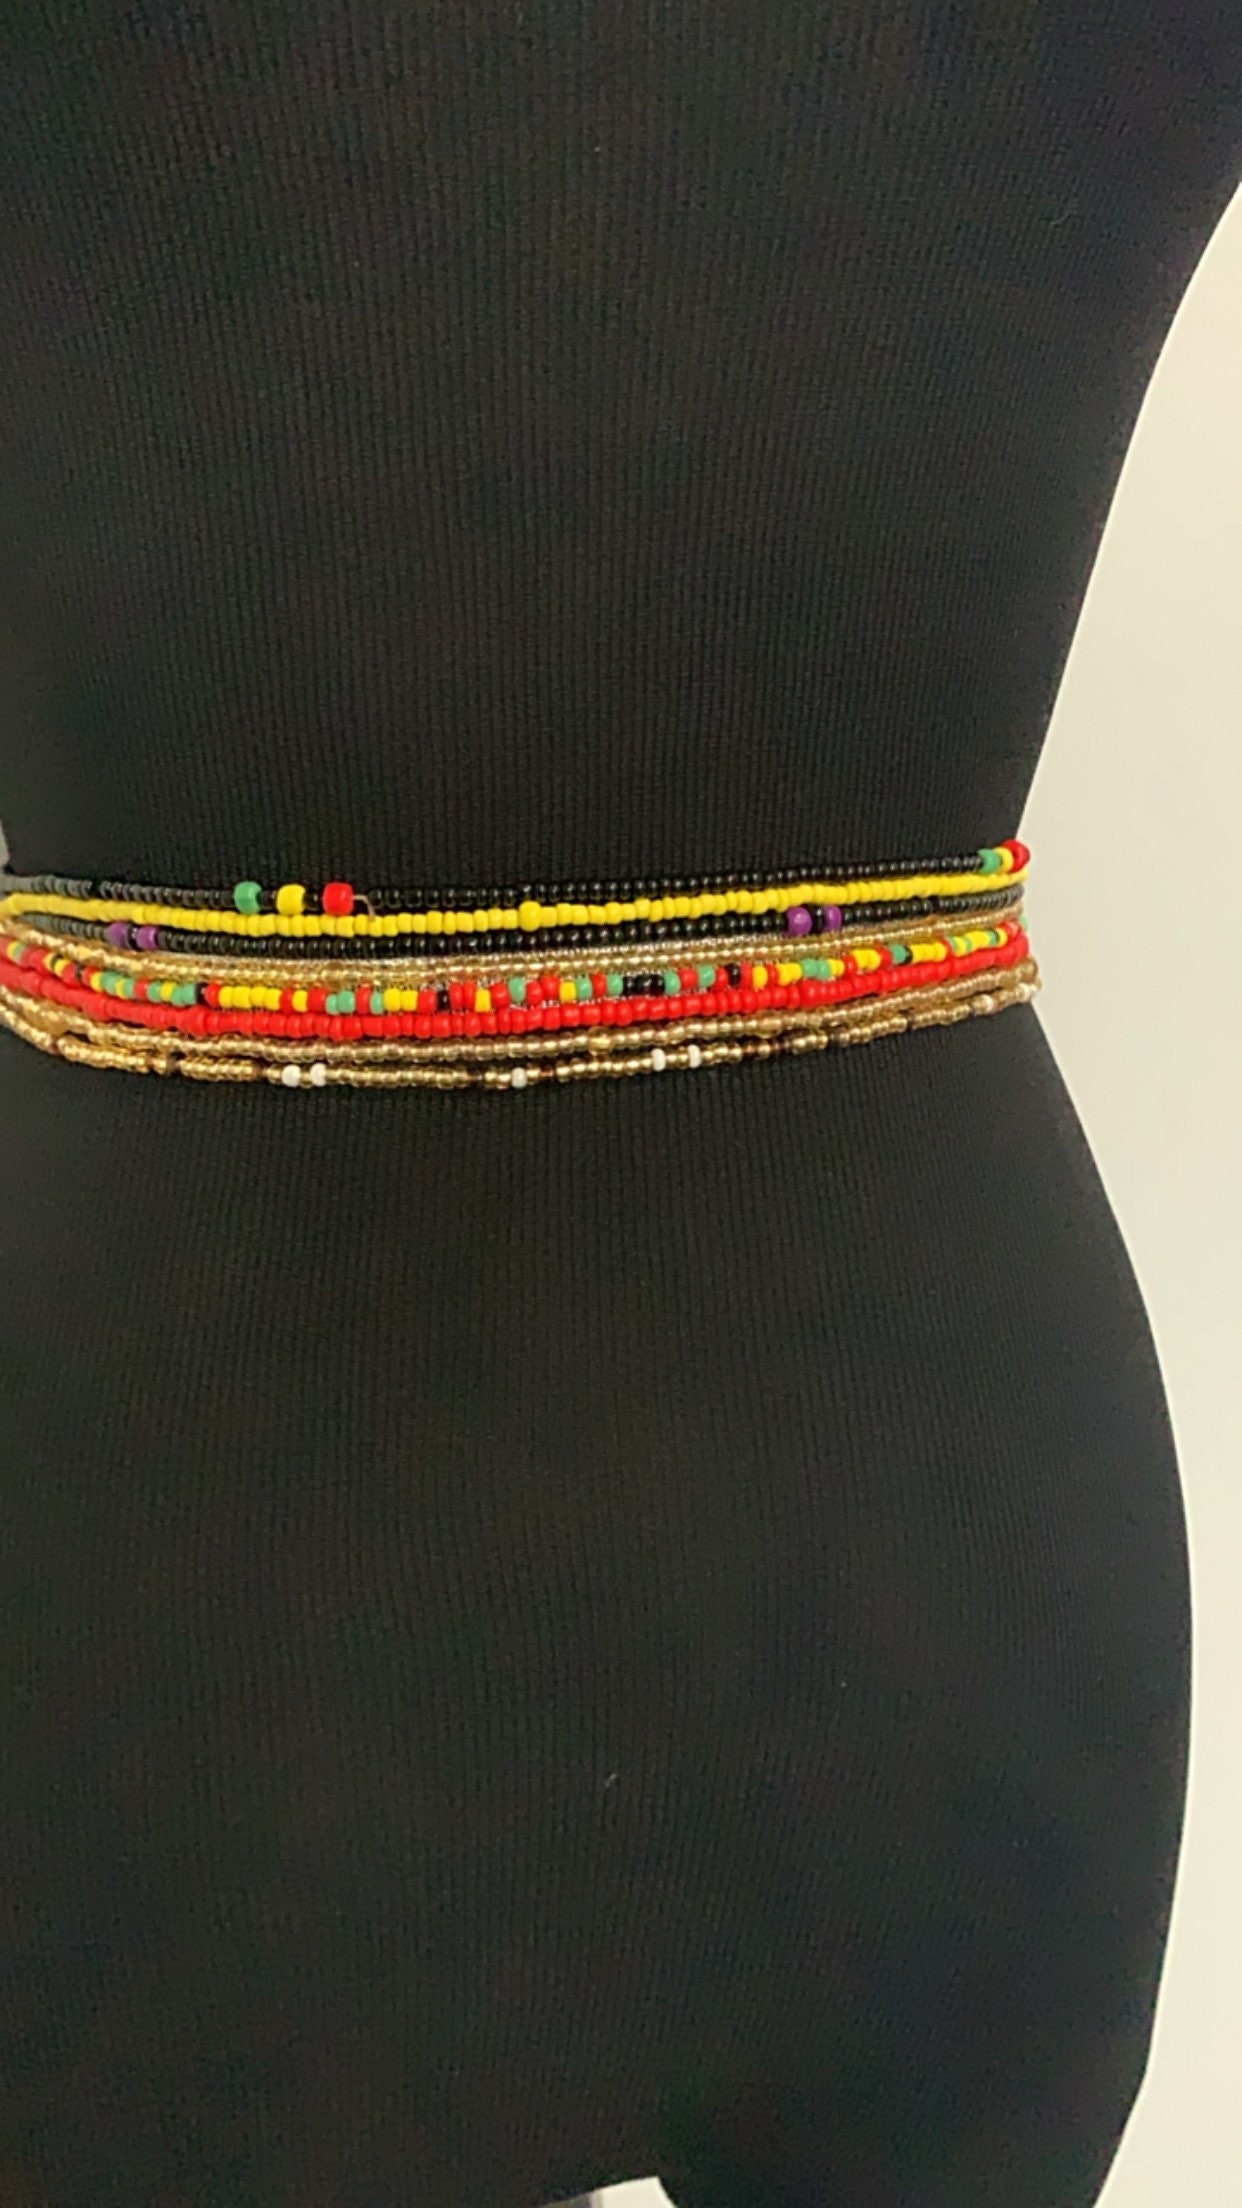 Authentic Ghanian Waist beads/ Neck beads | Etsy